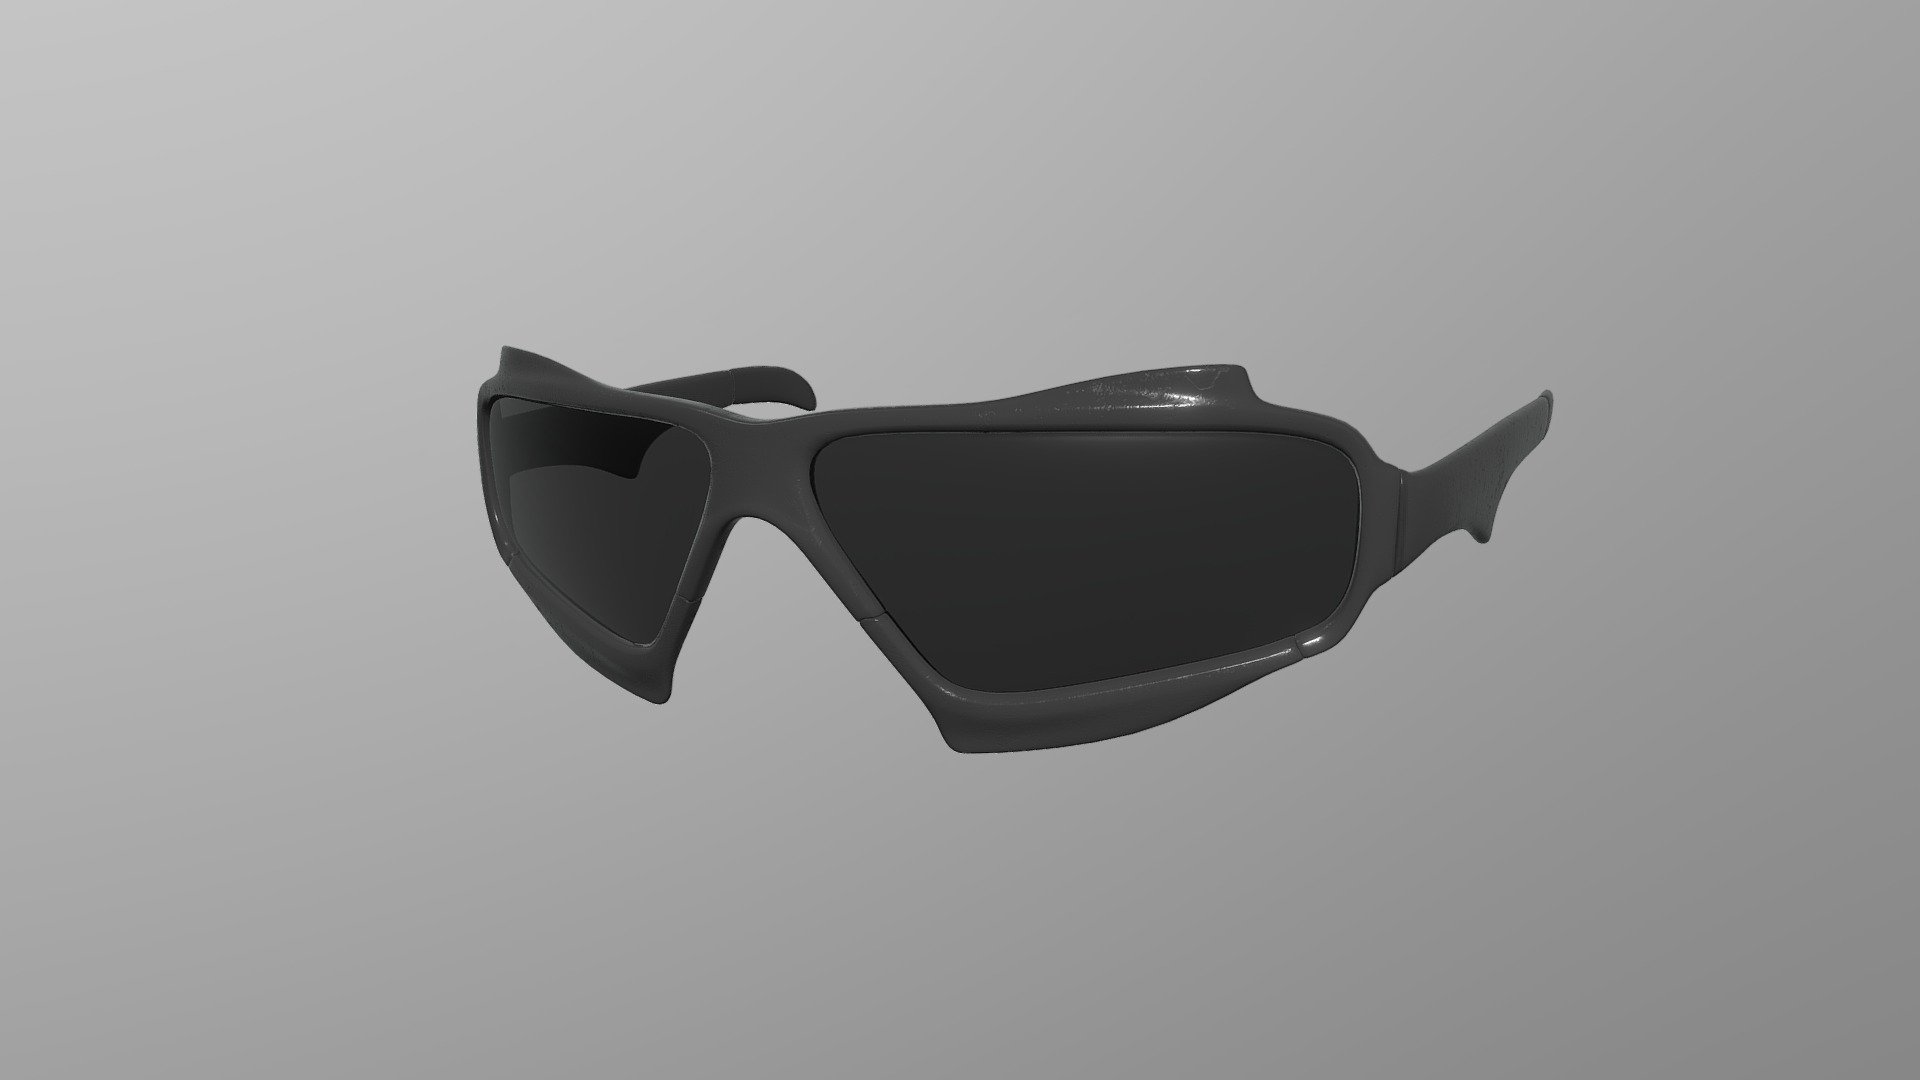 Sport Glasses
Bring your project to life with this mid poly 3D model of Sport Glasses. Perfect for use in games, animations, VR, AR, and more, this model is optimized for performance and still retains a high level of detail.


Features



Mid  poly design with 8,739 vertices

17,379 edges

8,662 faces (polygons)

17,352 tris

2k PBR Textures and materials

File formats included: .obj, .fbx, .dae, .stl


Tools Used
This Sport Glasses mid poly 3D model was created using Blender 3.3.1, a popular and versatile 3D creation software.


Availability
This mid poly Sport Glasses 3D model is ready for use and available for purchase. Bring your project to the next level with this high-quality and optimized model 3d model